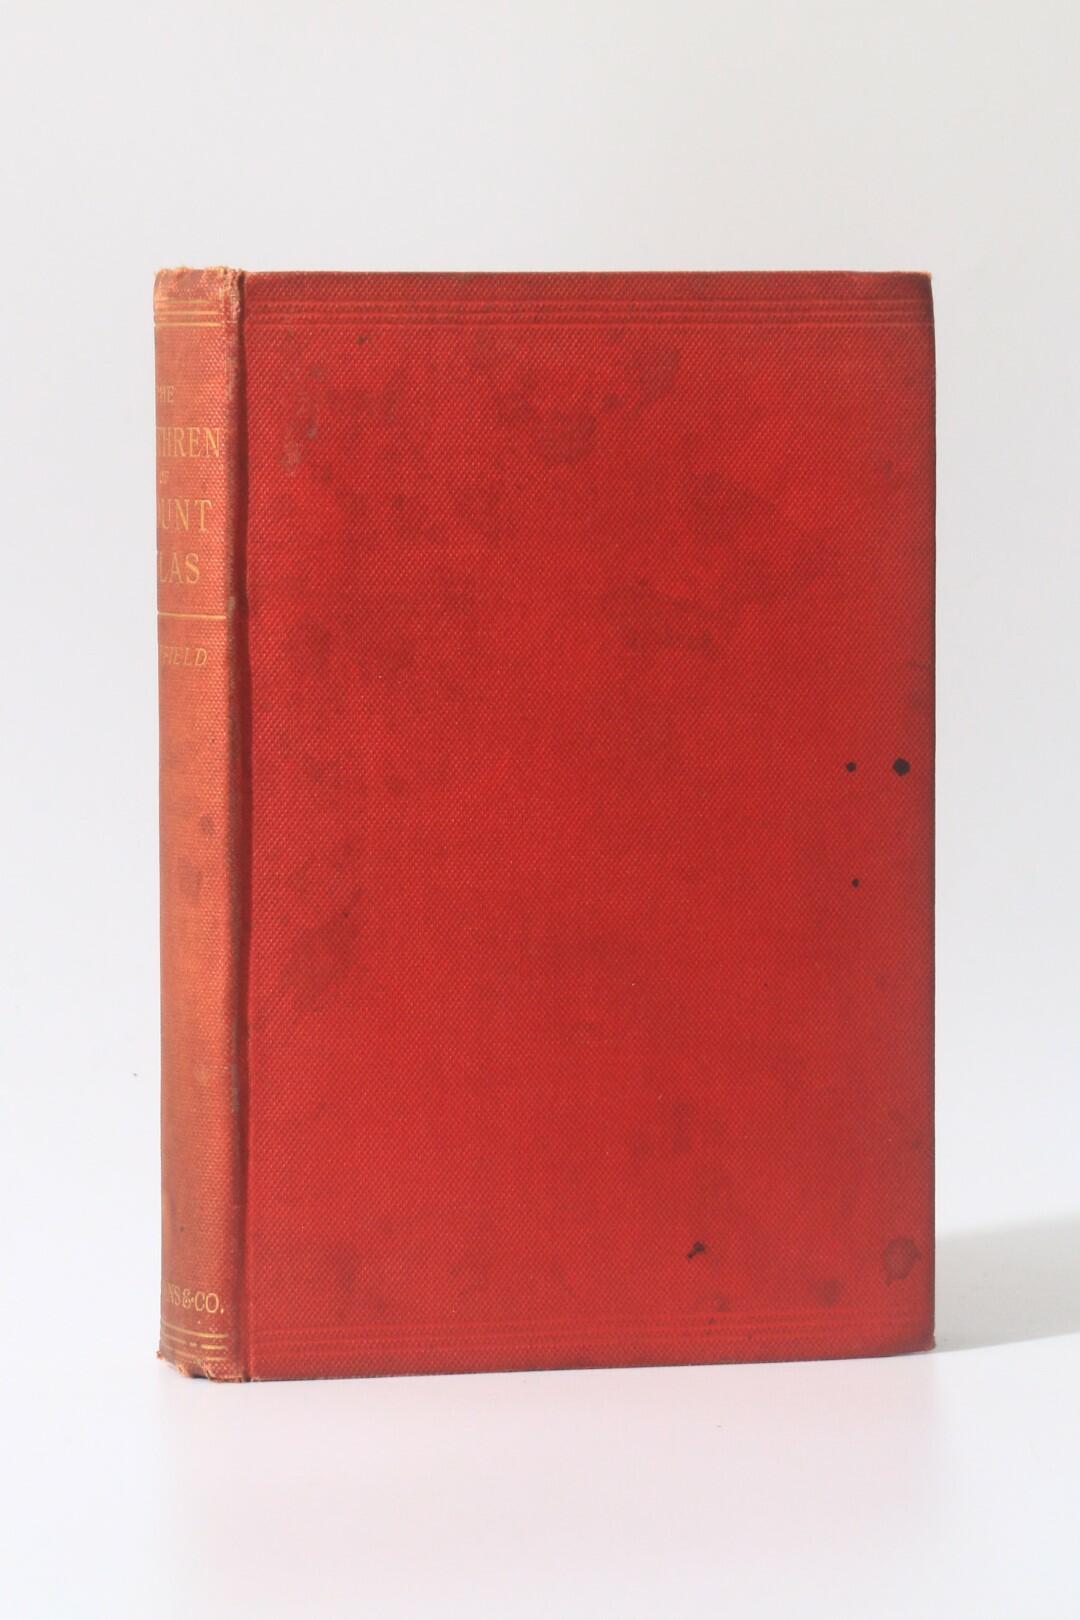 Hugh E.M. Stutfield - The Brethren of Mount Atlas Being the First Part of An African Theosophical Society - Longmans, Green & Co, 1891, First Edition.